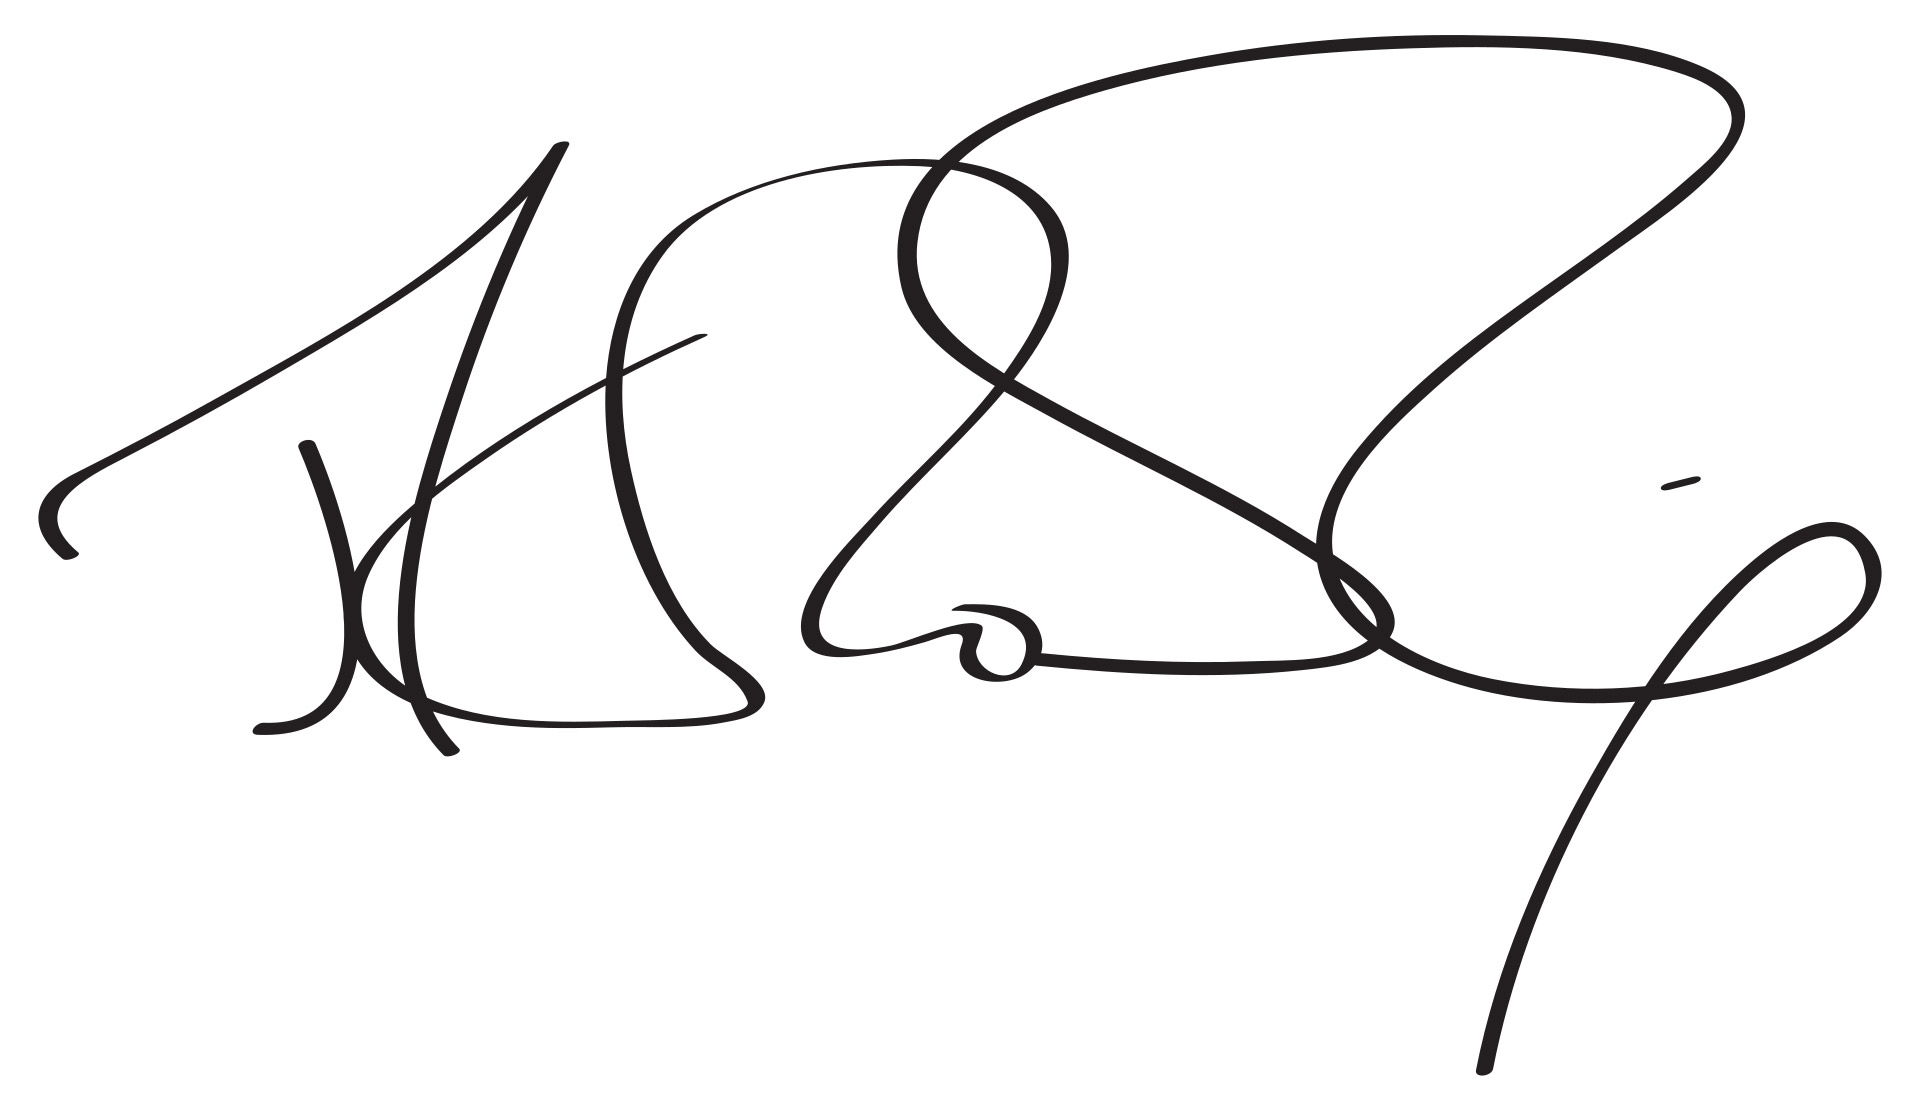 official signature of celebrity J.K. Rowling